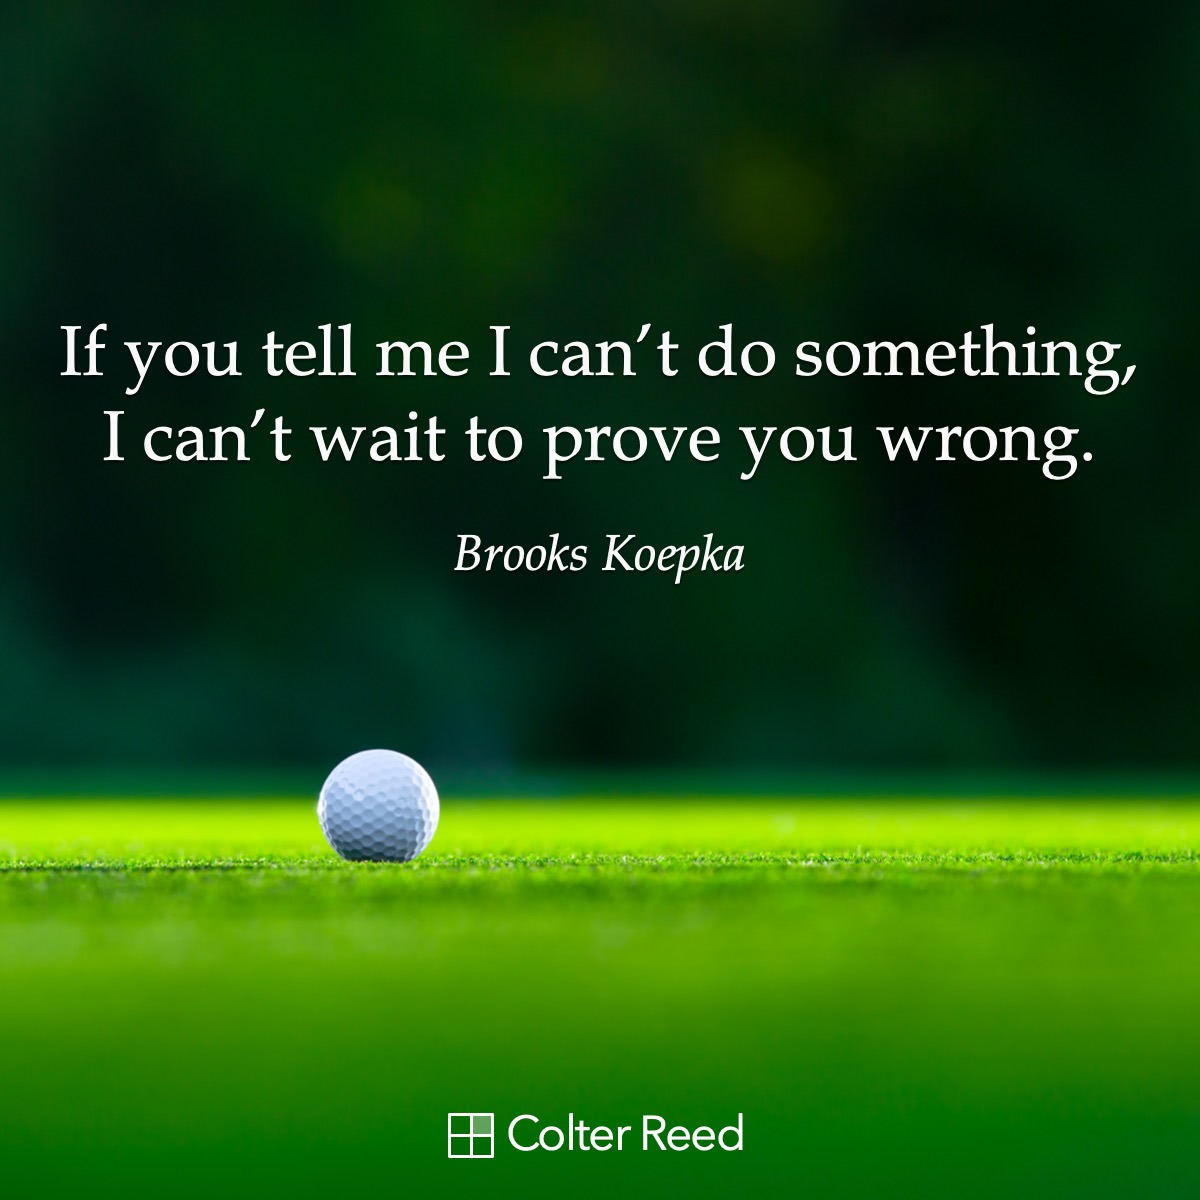 If you tell me I can’t do something, I can’t wait to prove you wrong. —Brooks Koepka